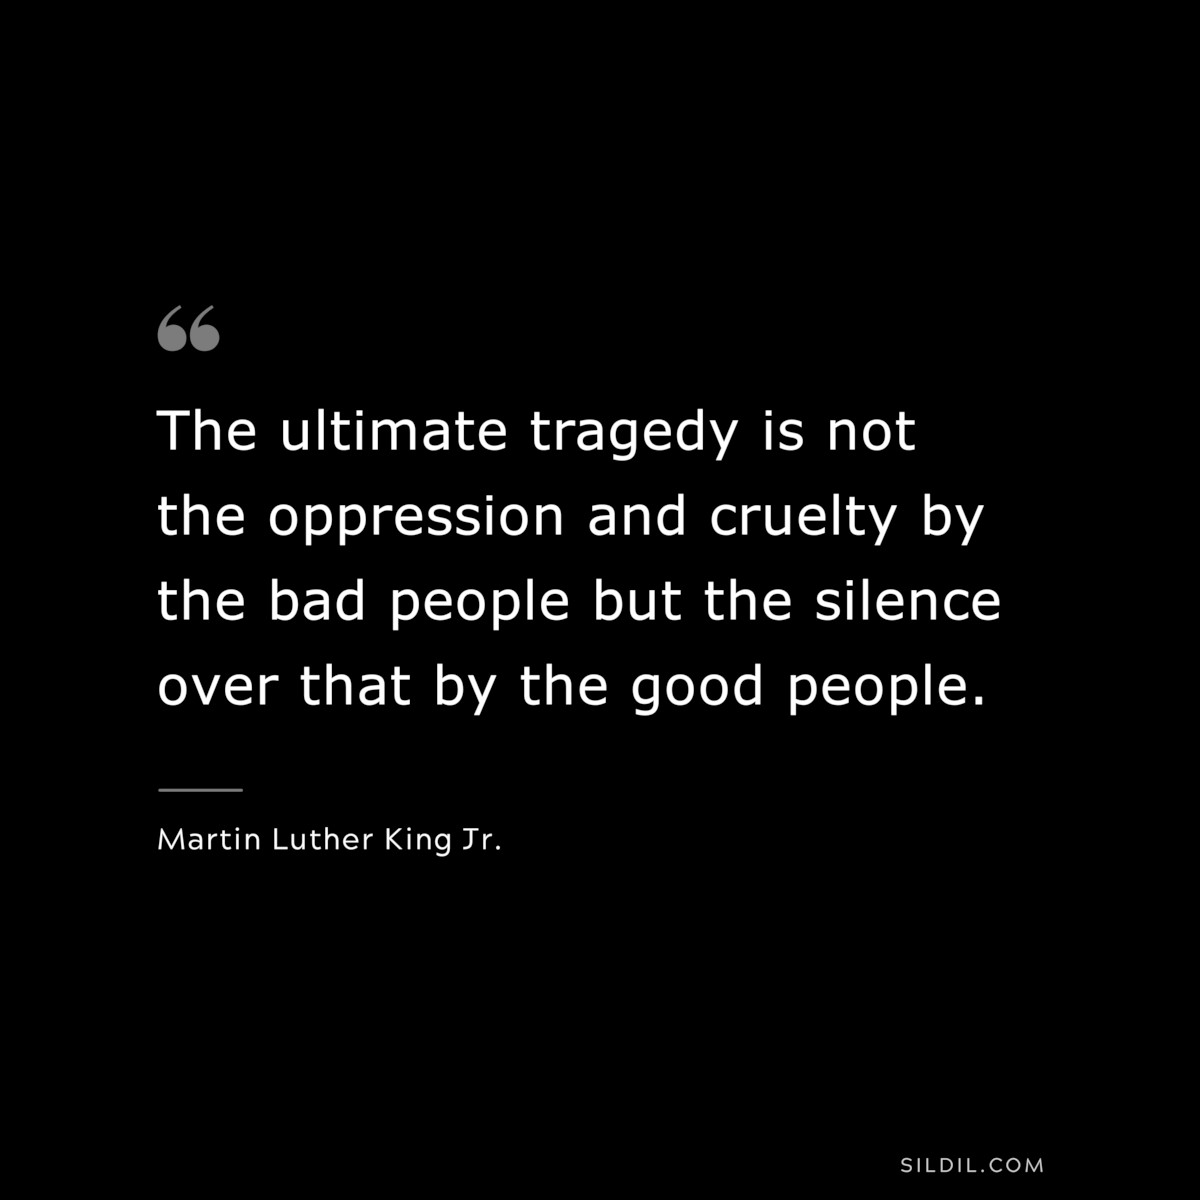 The ultimate tragedy is not the oppression and cruelty by the bad people but the silence over that by the good people. ― Martin Luther King Jr.